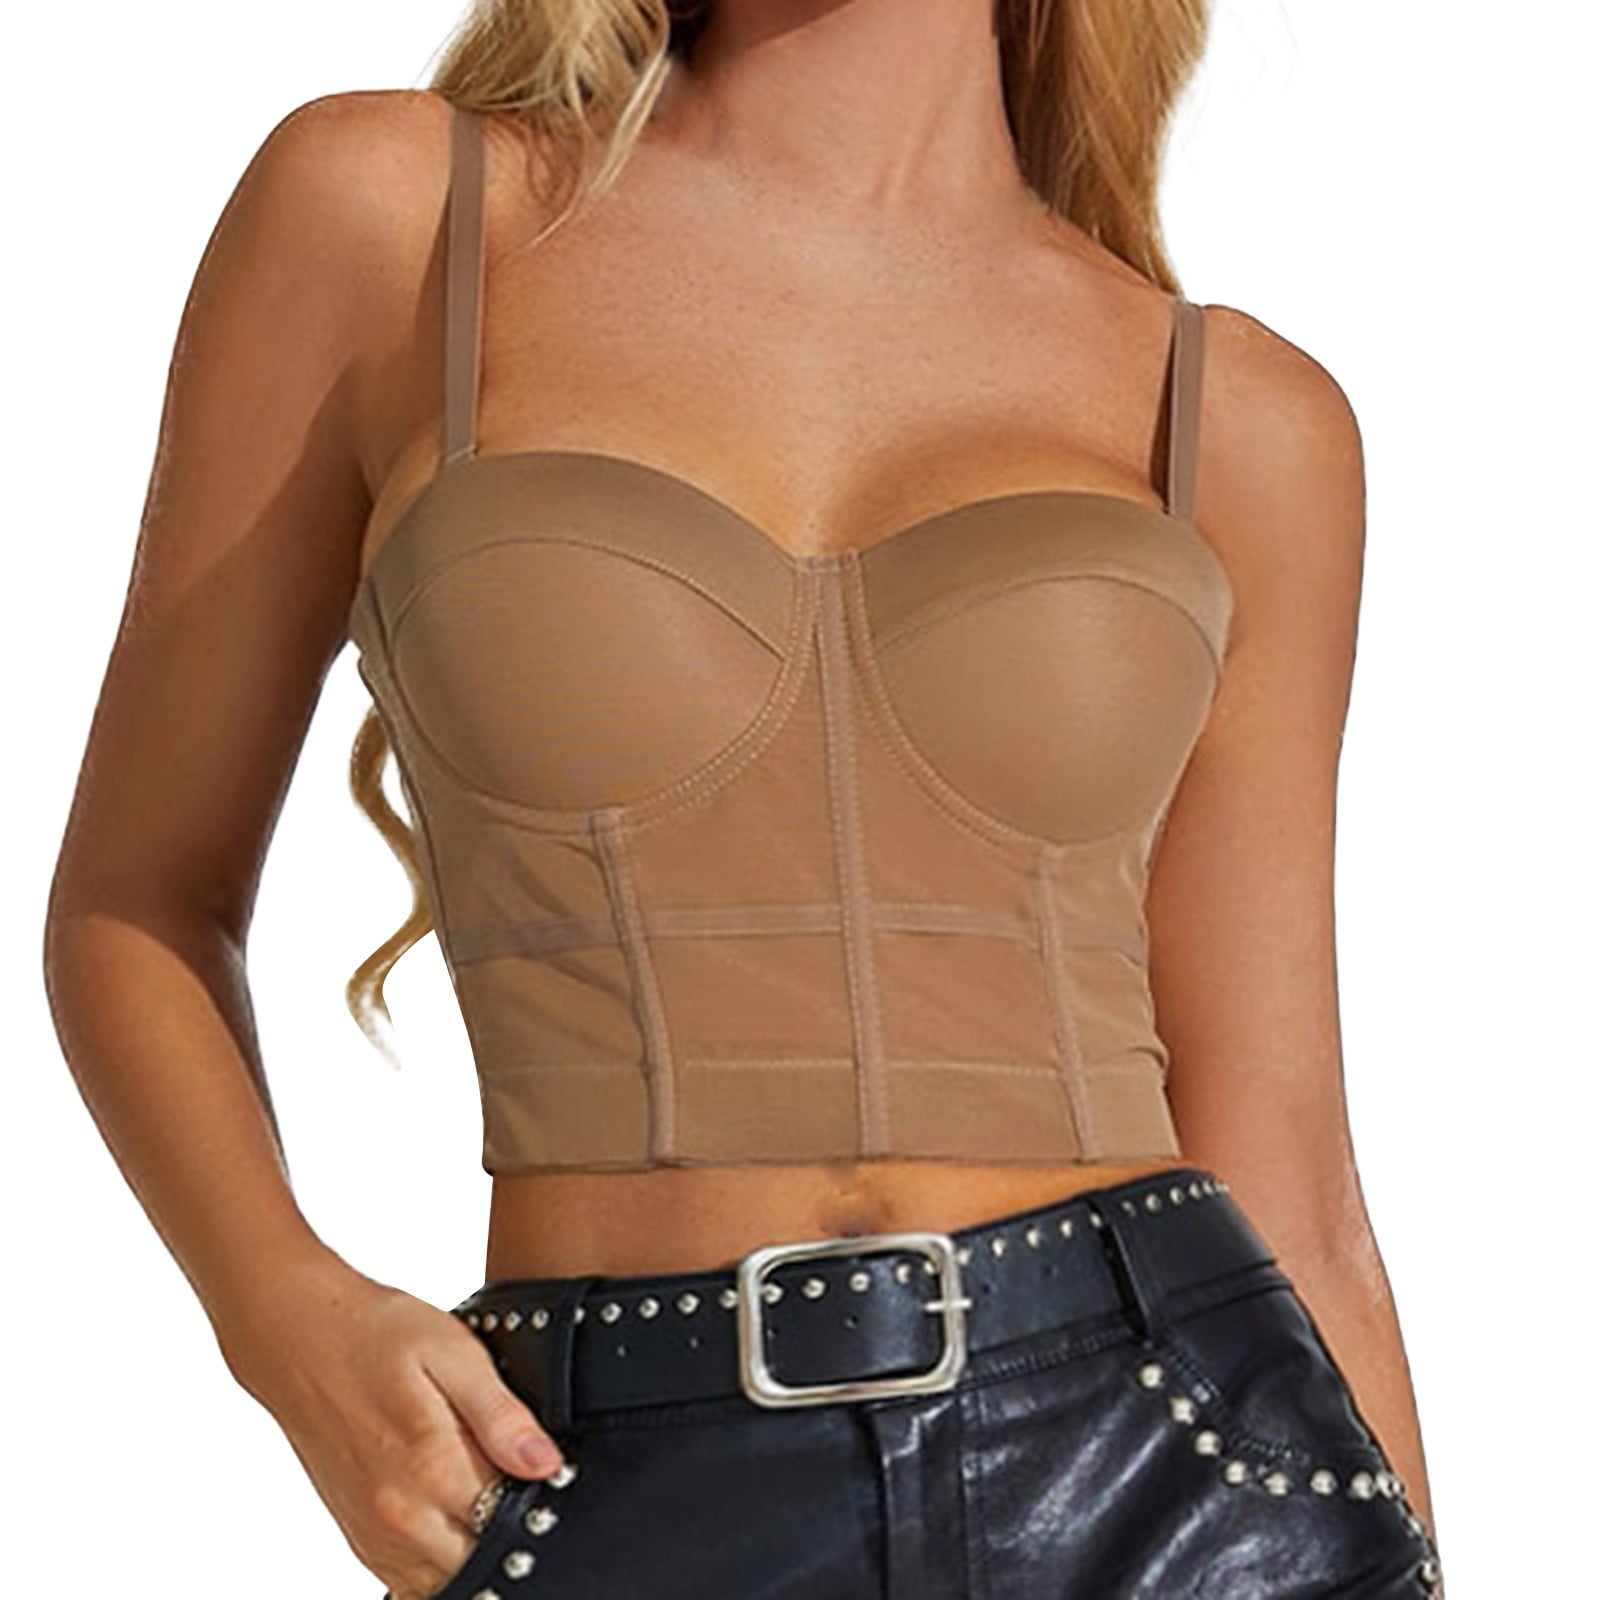 Baycosin Tank Top With Built In Bra For Women Corset Clothing Hand